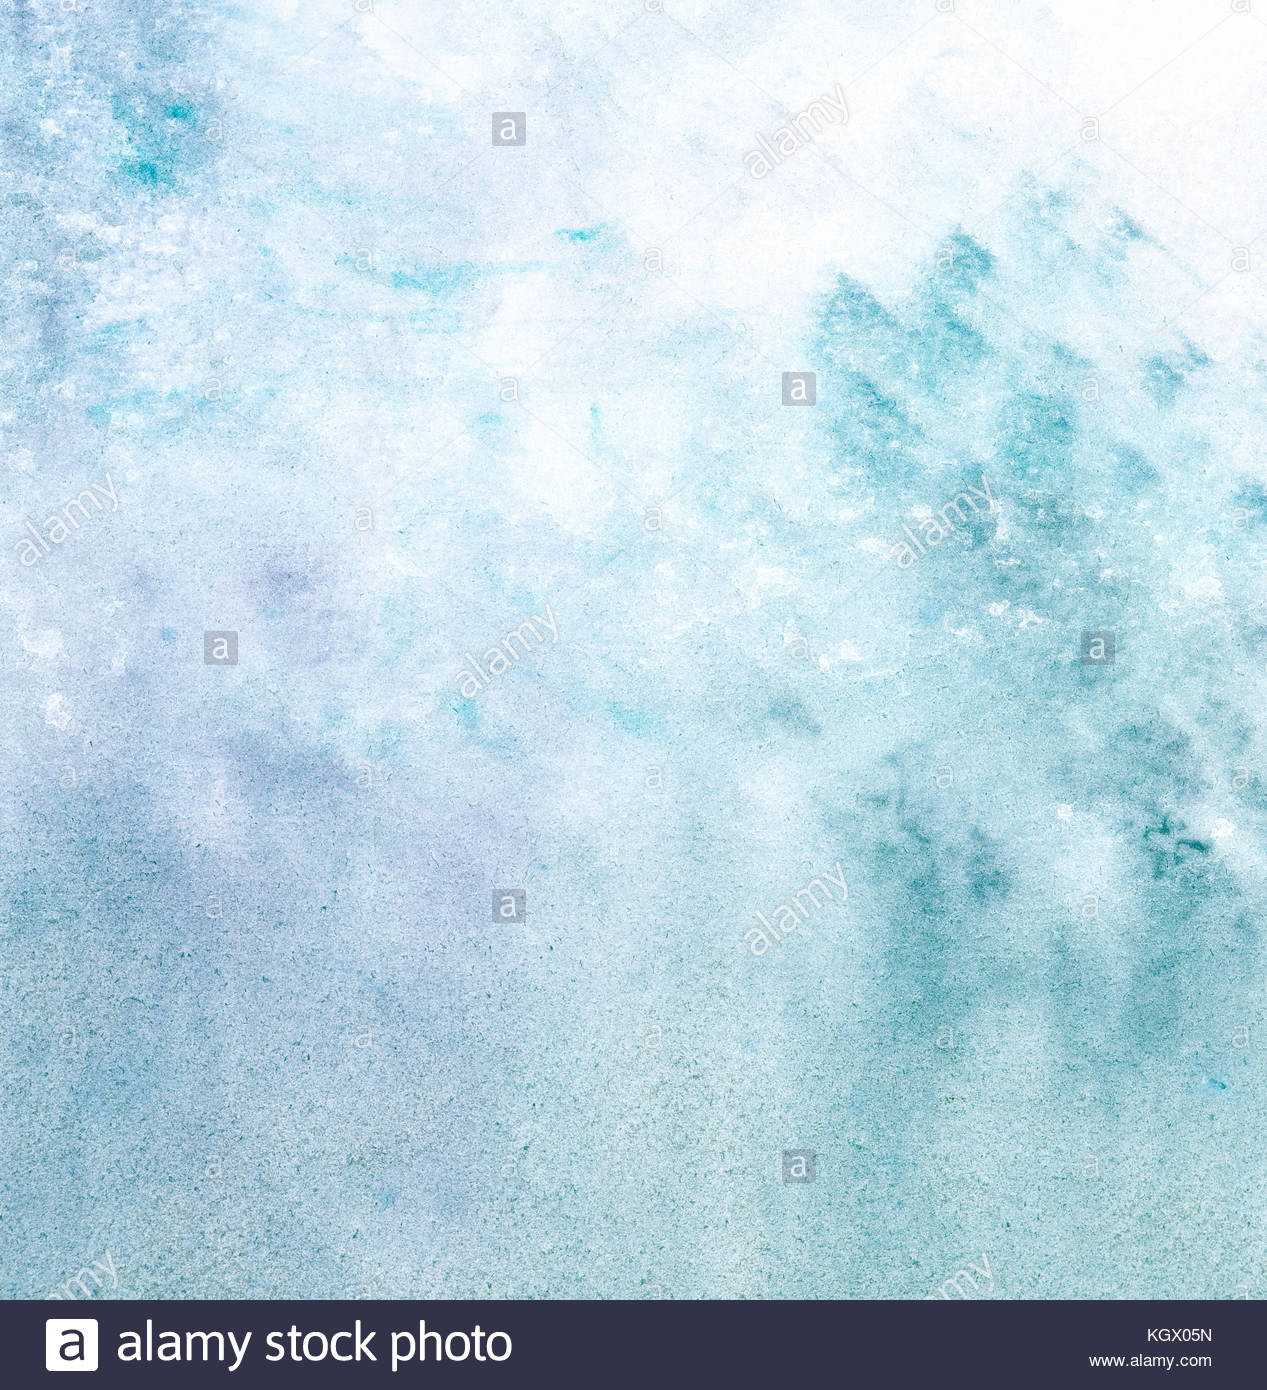 Watercolor Winter Background Hand Painting Stock Photo